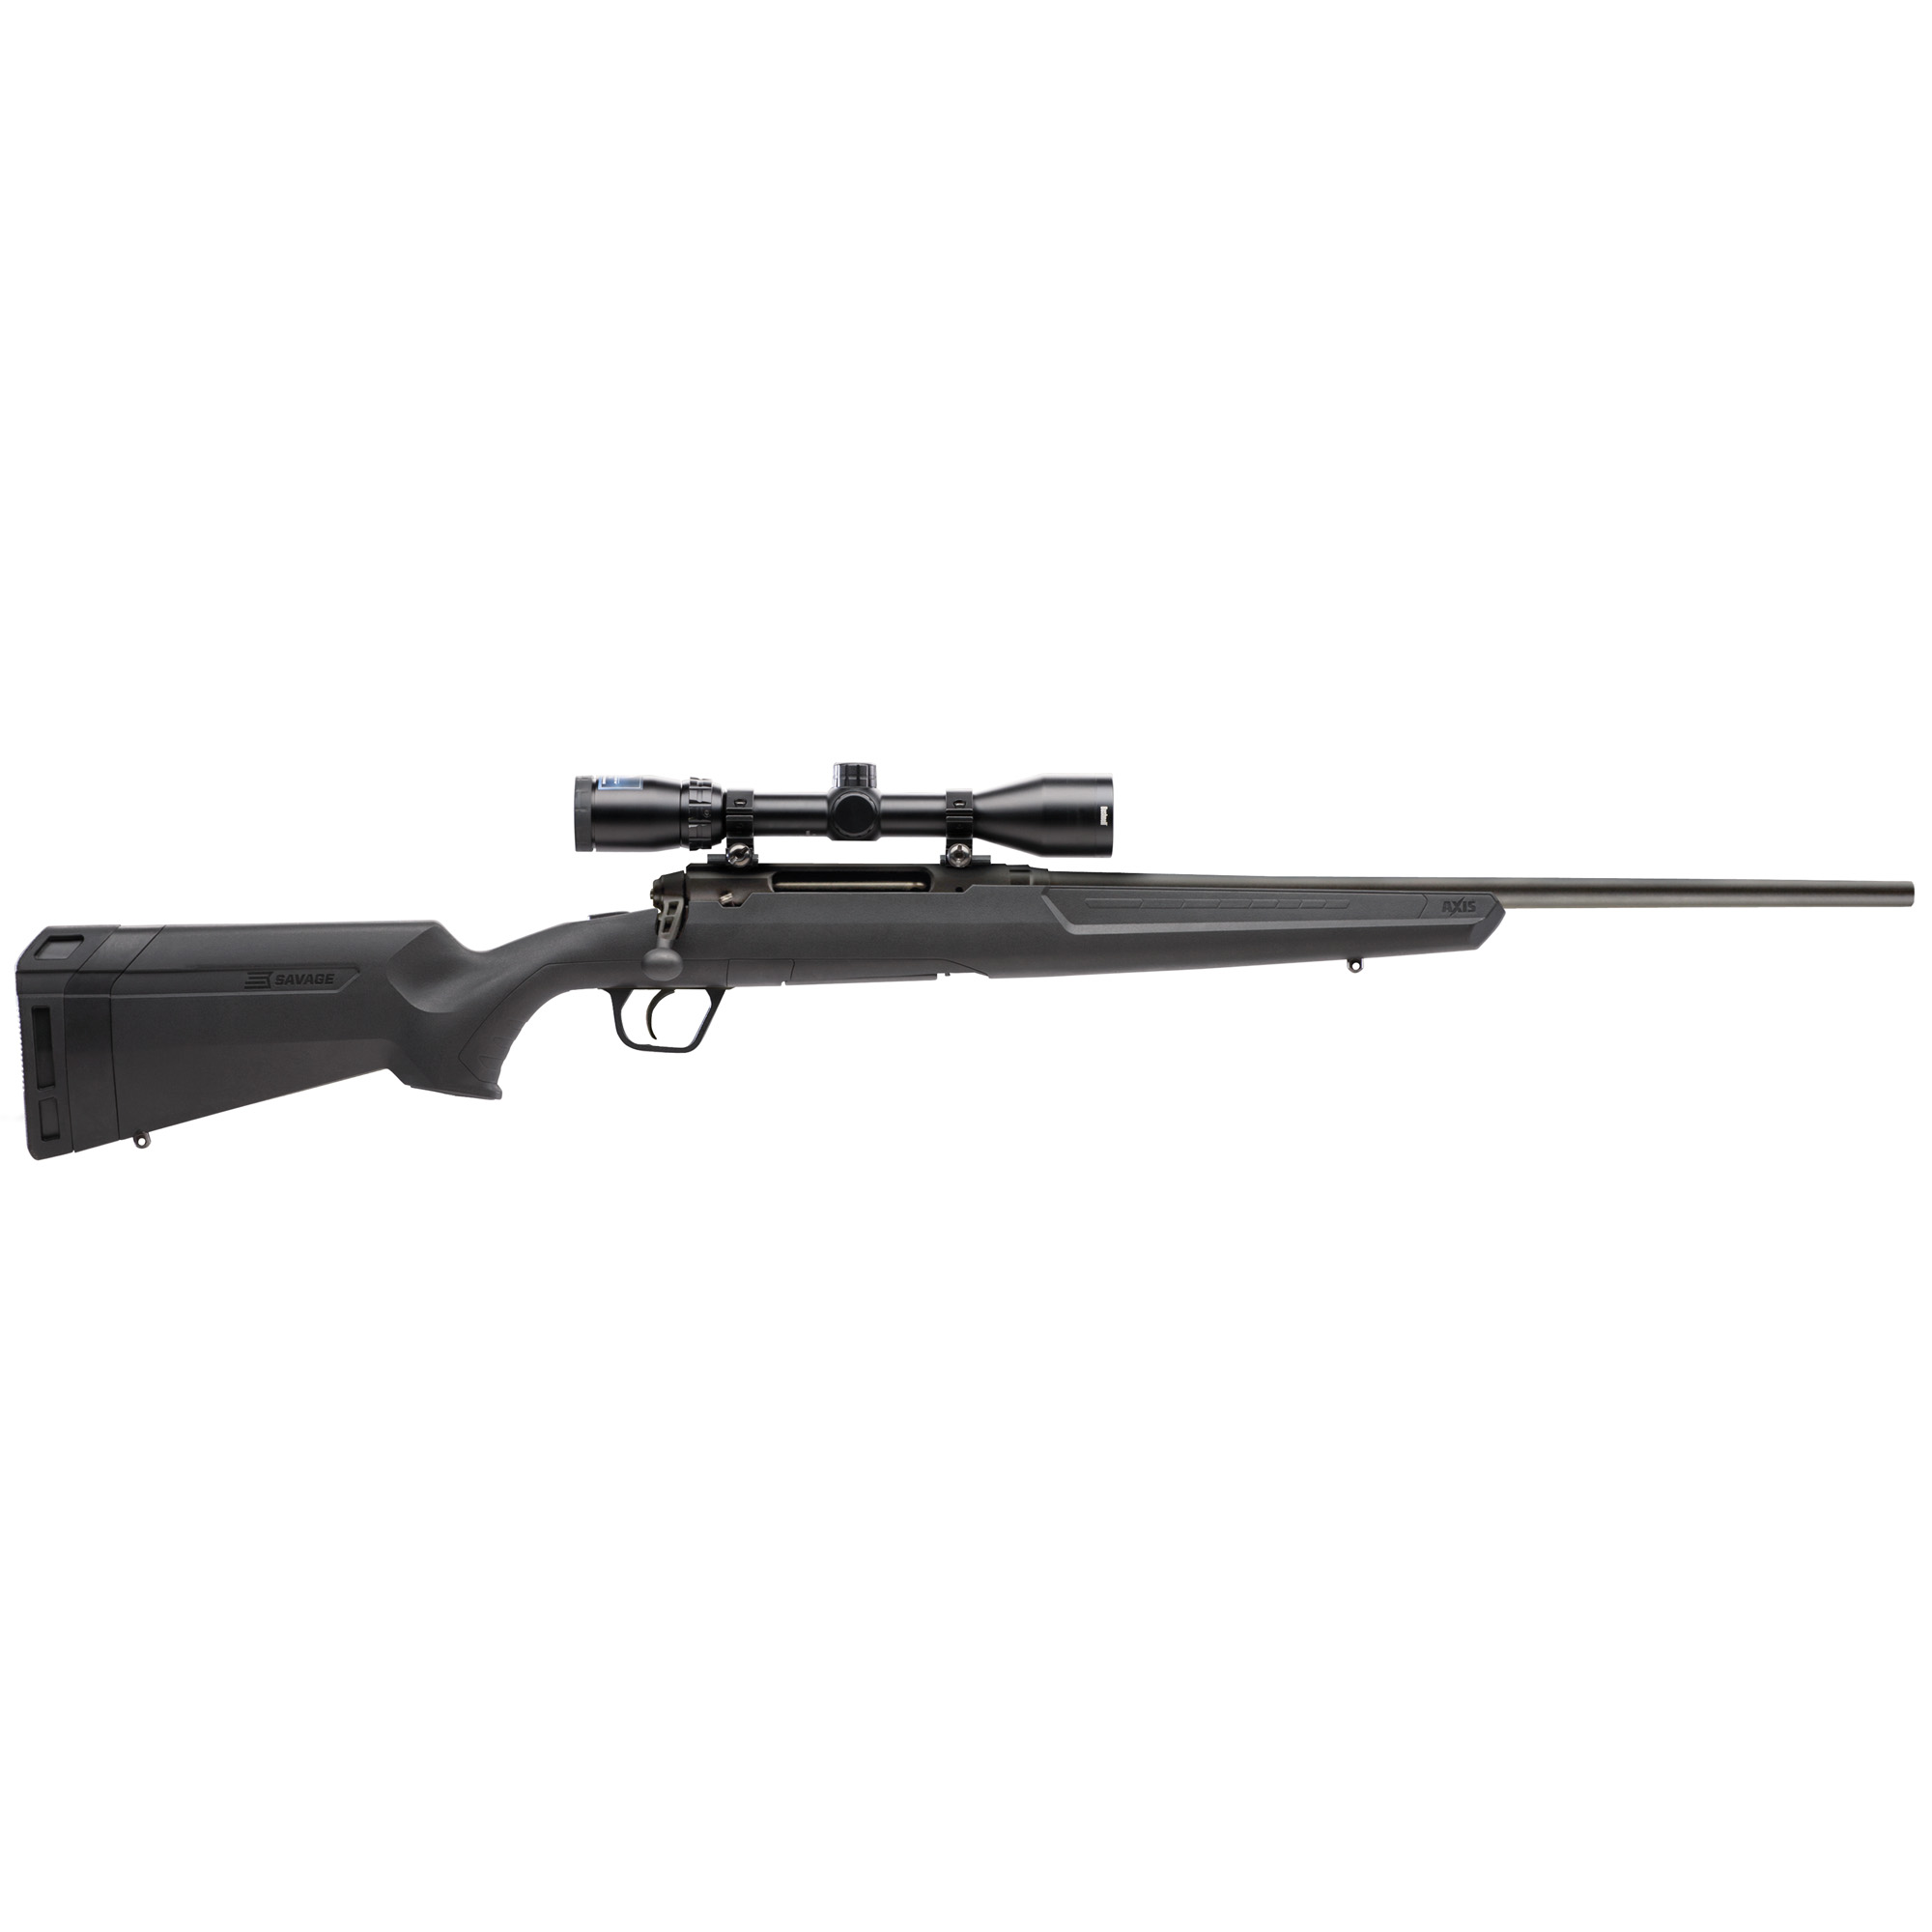 SAVAGE ARMS AXIS XP COMPACT 223 20 4RD BLK